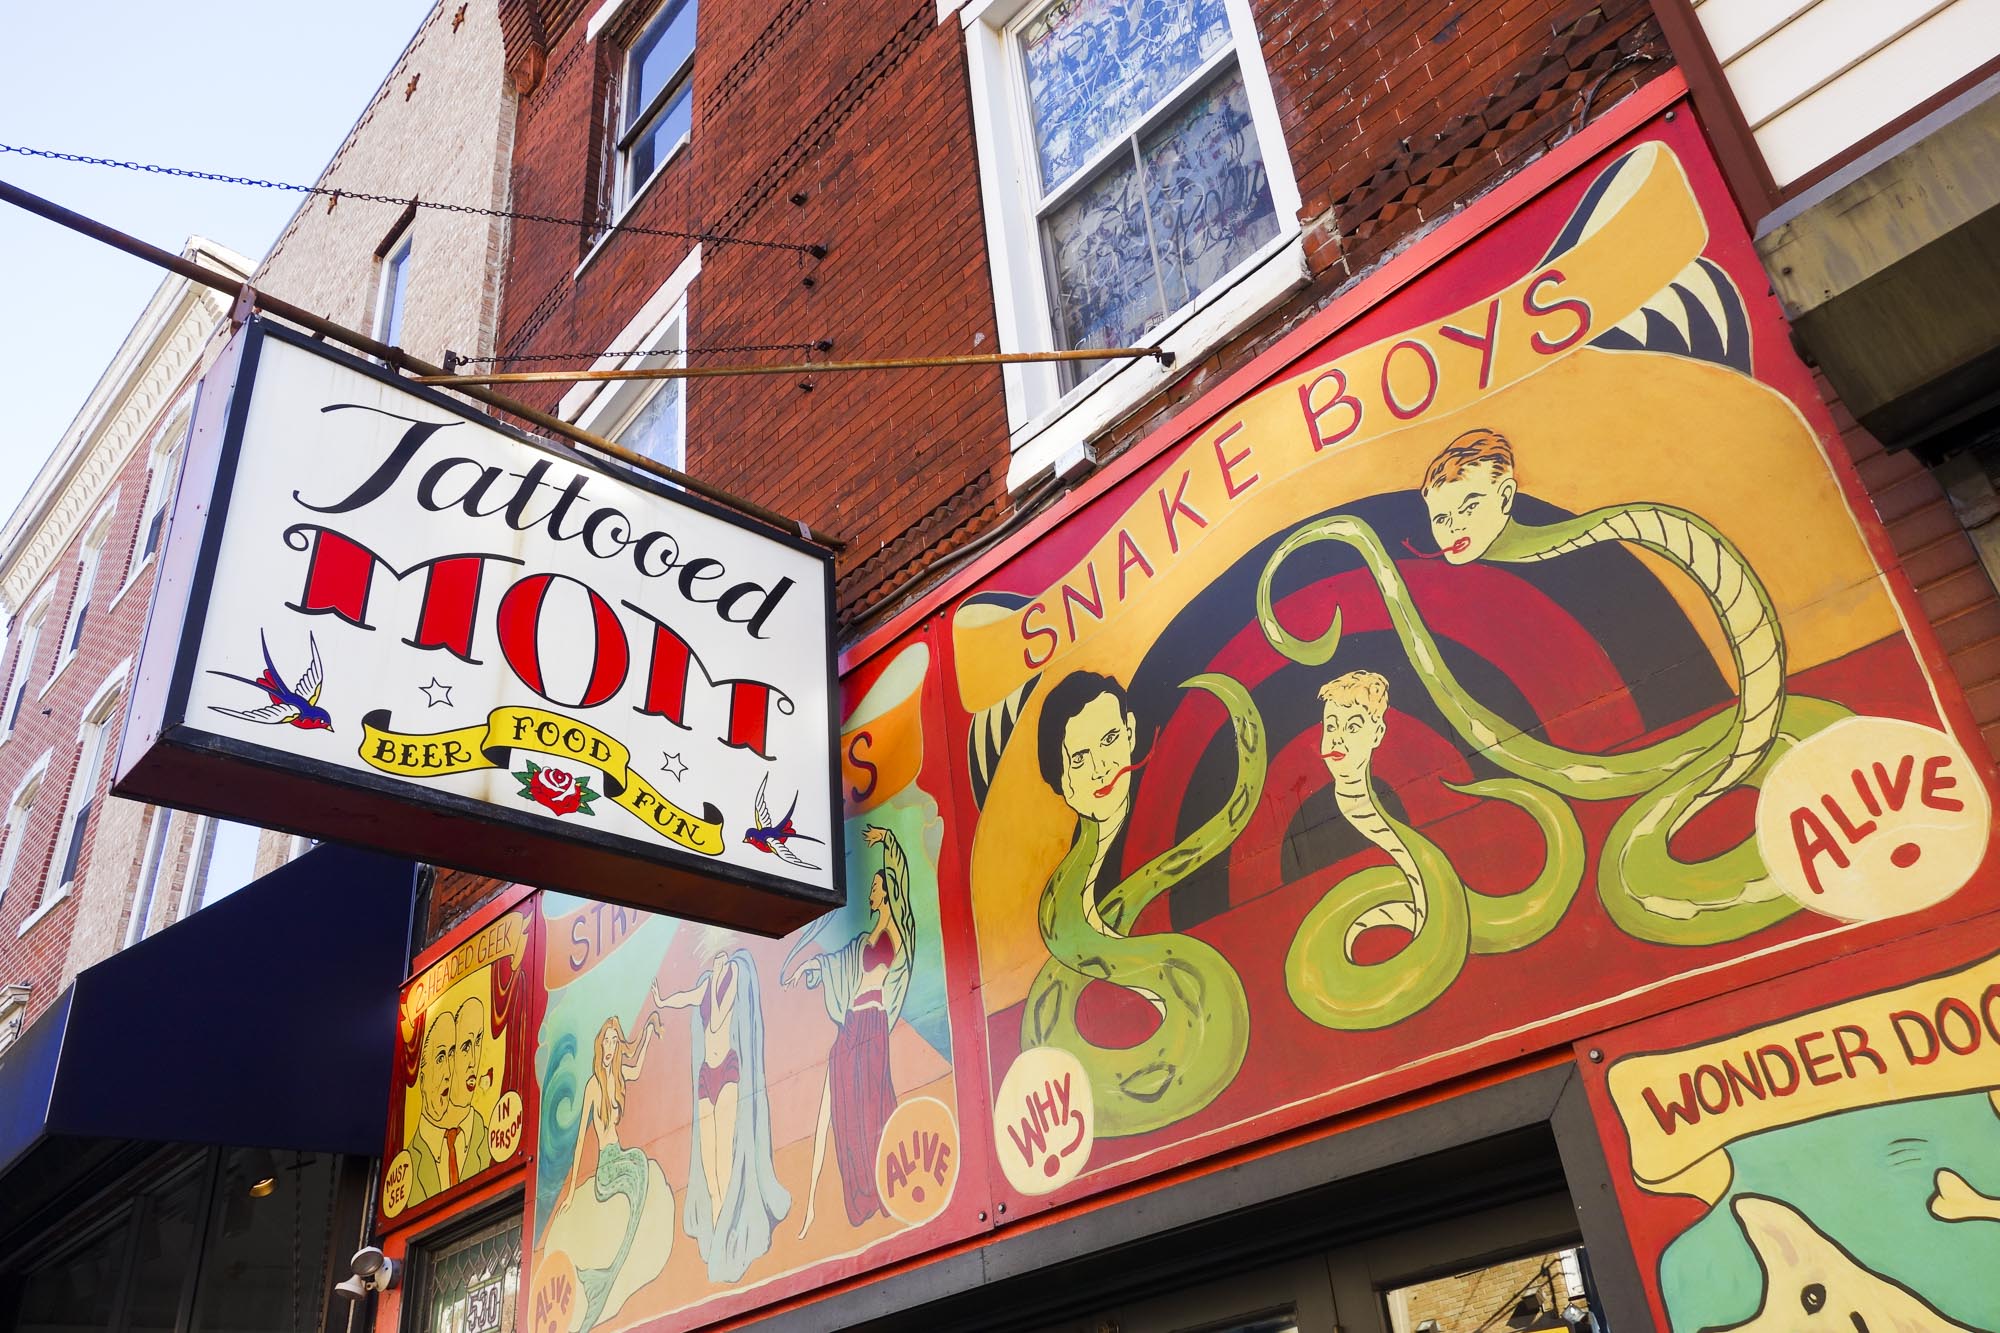 Tattooed Mom is located at 530 South Street in Philadelphia.